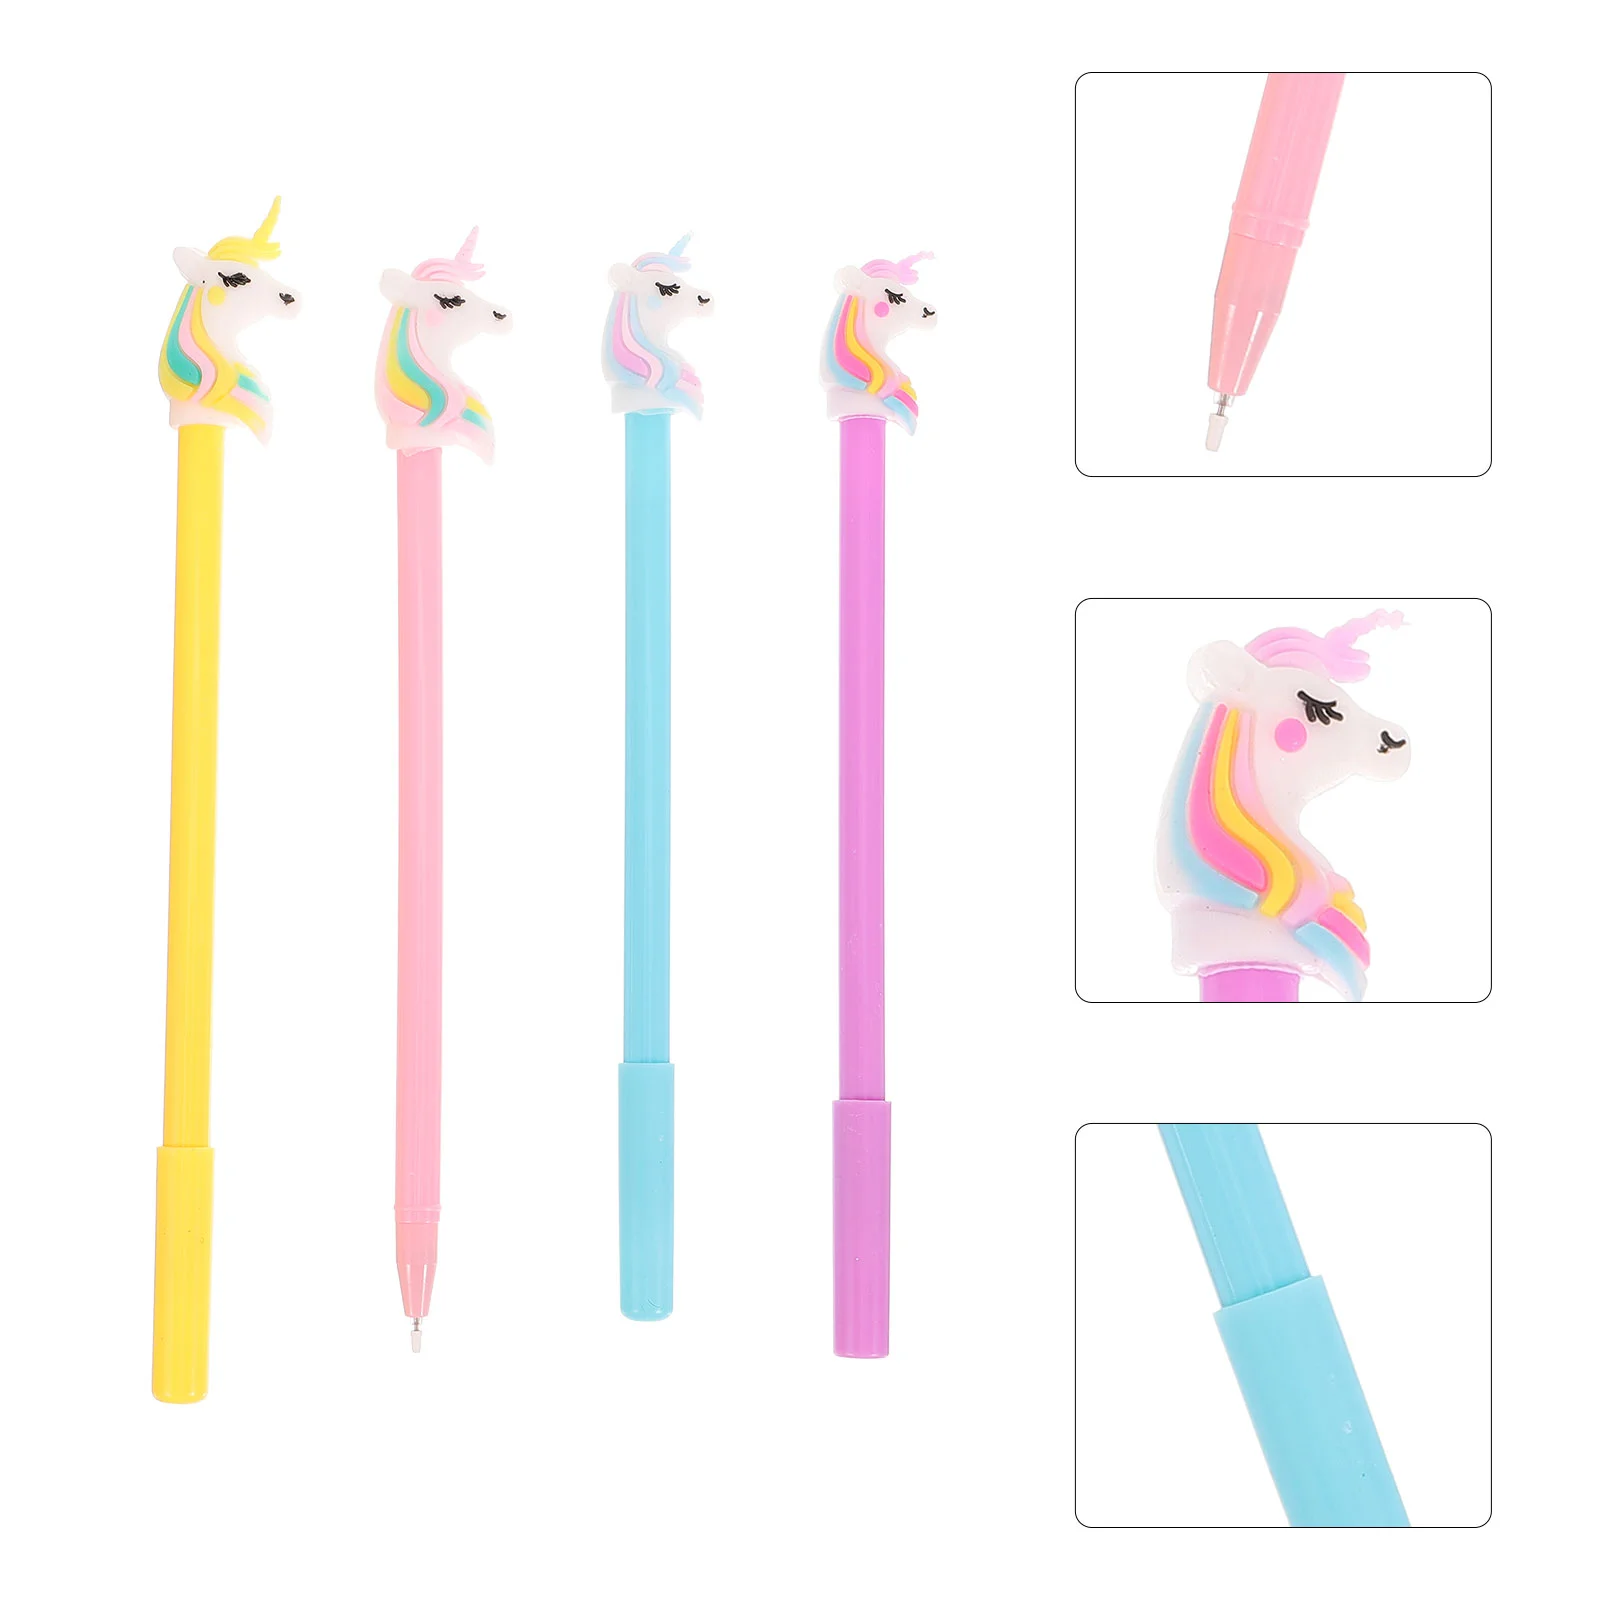 

Signature Pens, 4pcs Signature Pen, Signature Pens Writing Pens, Party Supplies for Kids Party Favor Toys Gifts Random